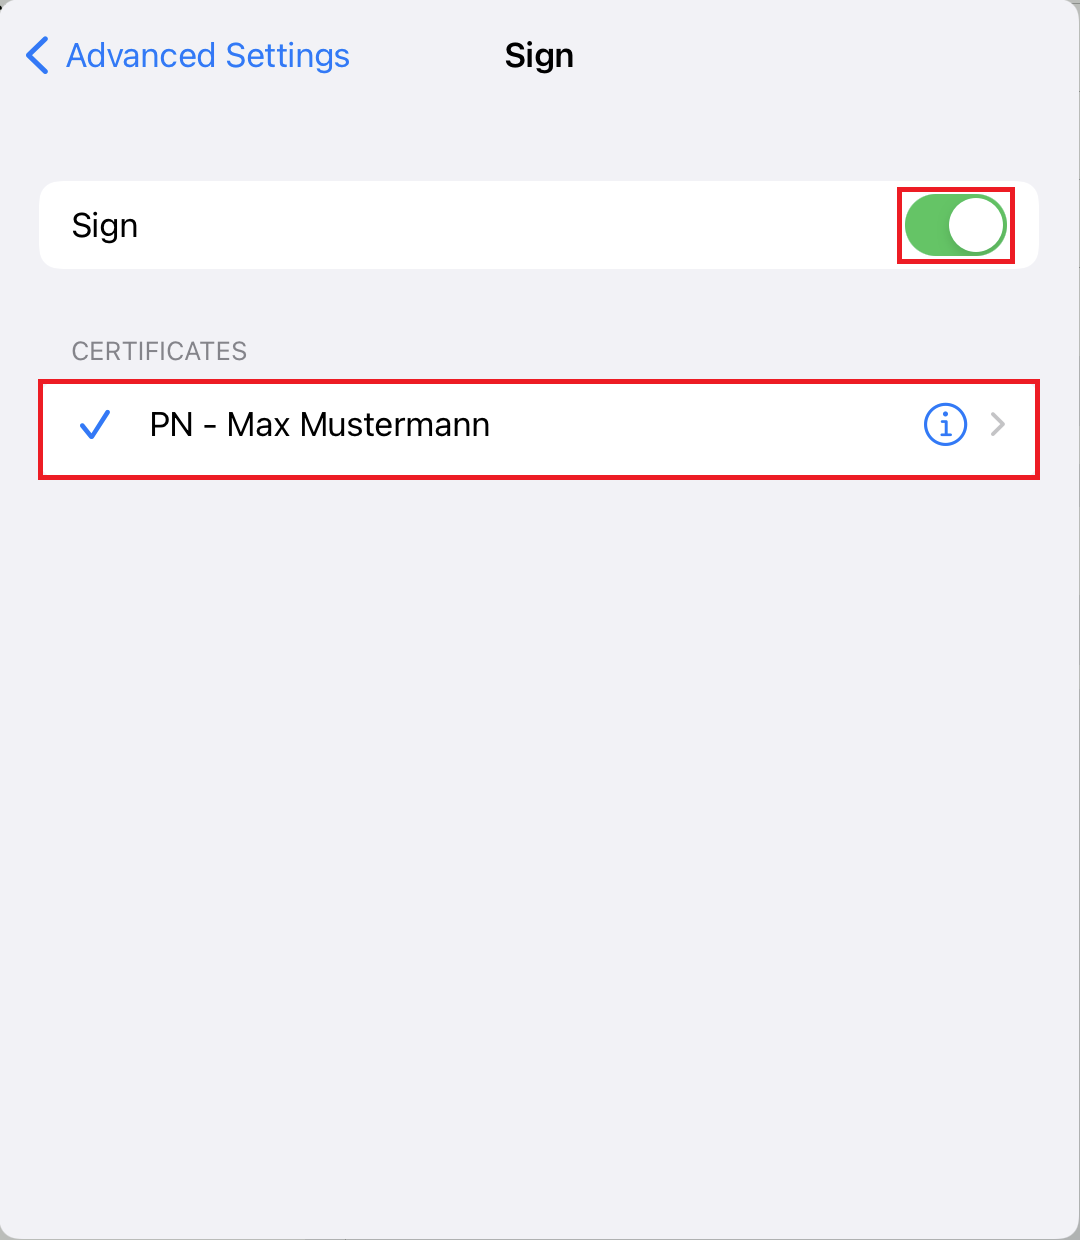 Window Sign, clickable on the left Smaller sign Advanced Settings. Sign, on the right marked enabled slider. CERTIFICATES. Marked line symbol tick, PN - Max Mustermann, right symbol i in circle, greater sign.